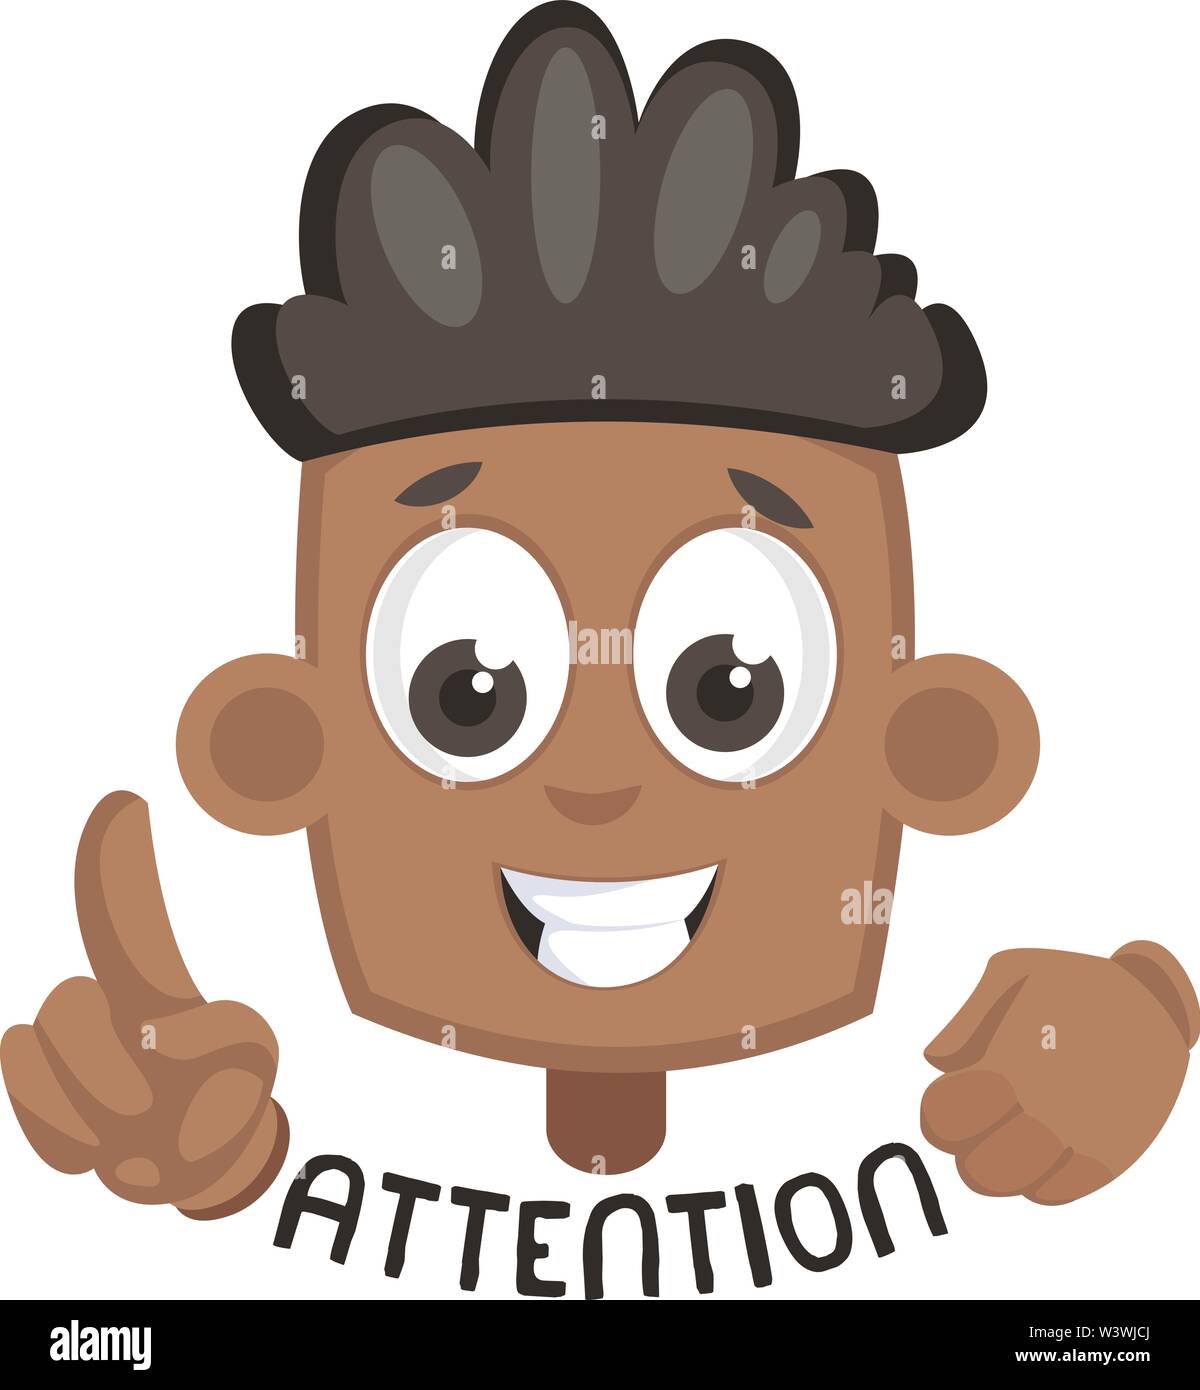 Boy asking for attention, illustration, vector on white background. Stock Vector